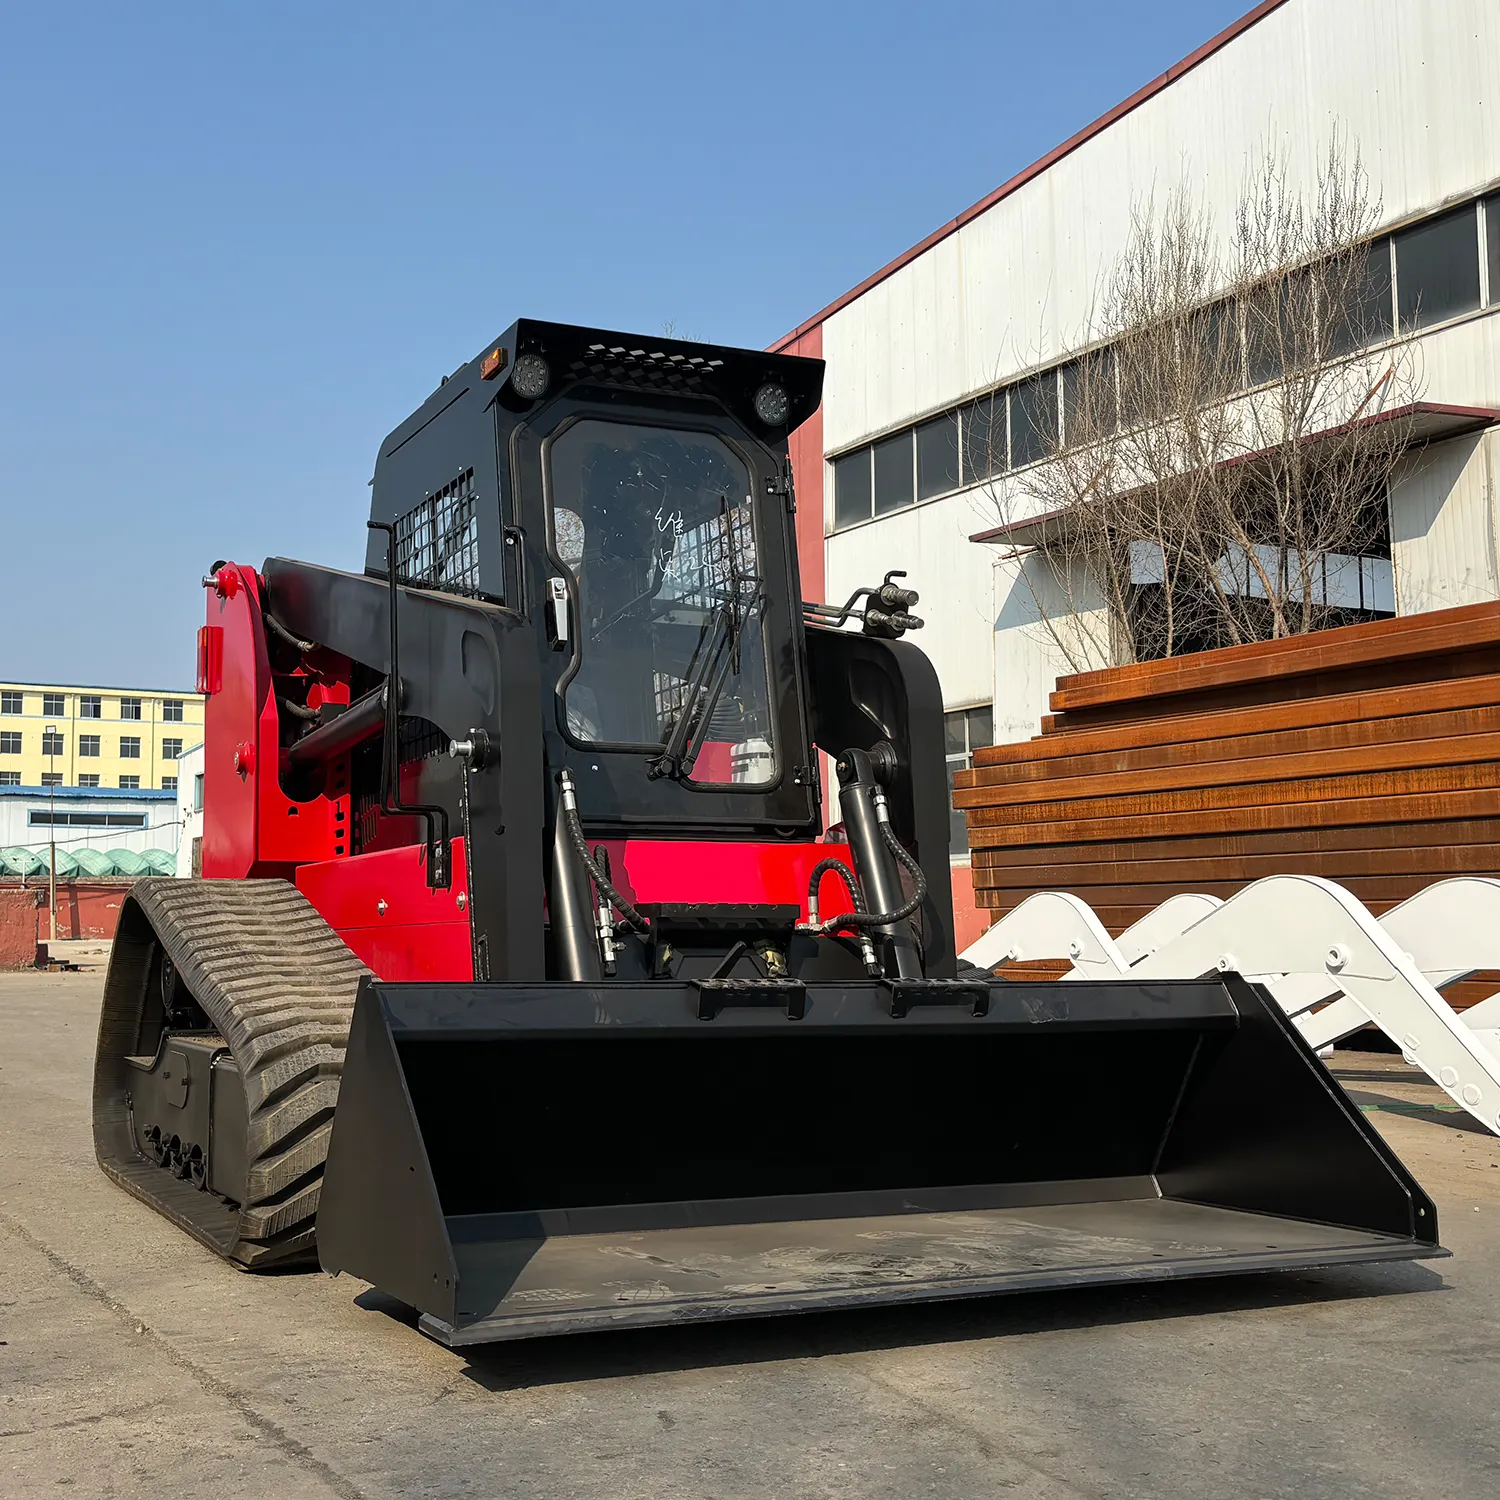 EPA skid steer tracks high flow china diesel loader front end cargador 1 ton TS65 75 hp 140hp with mulcher bucket free shipping